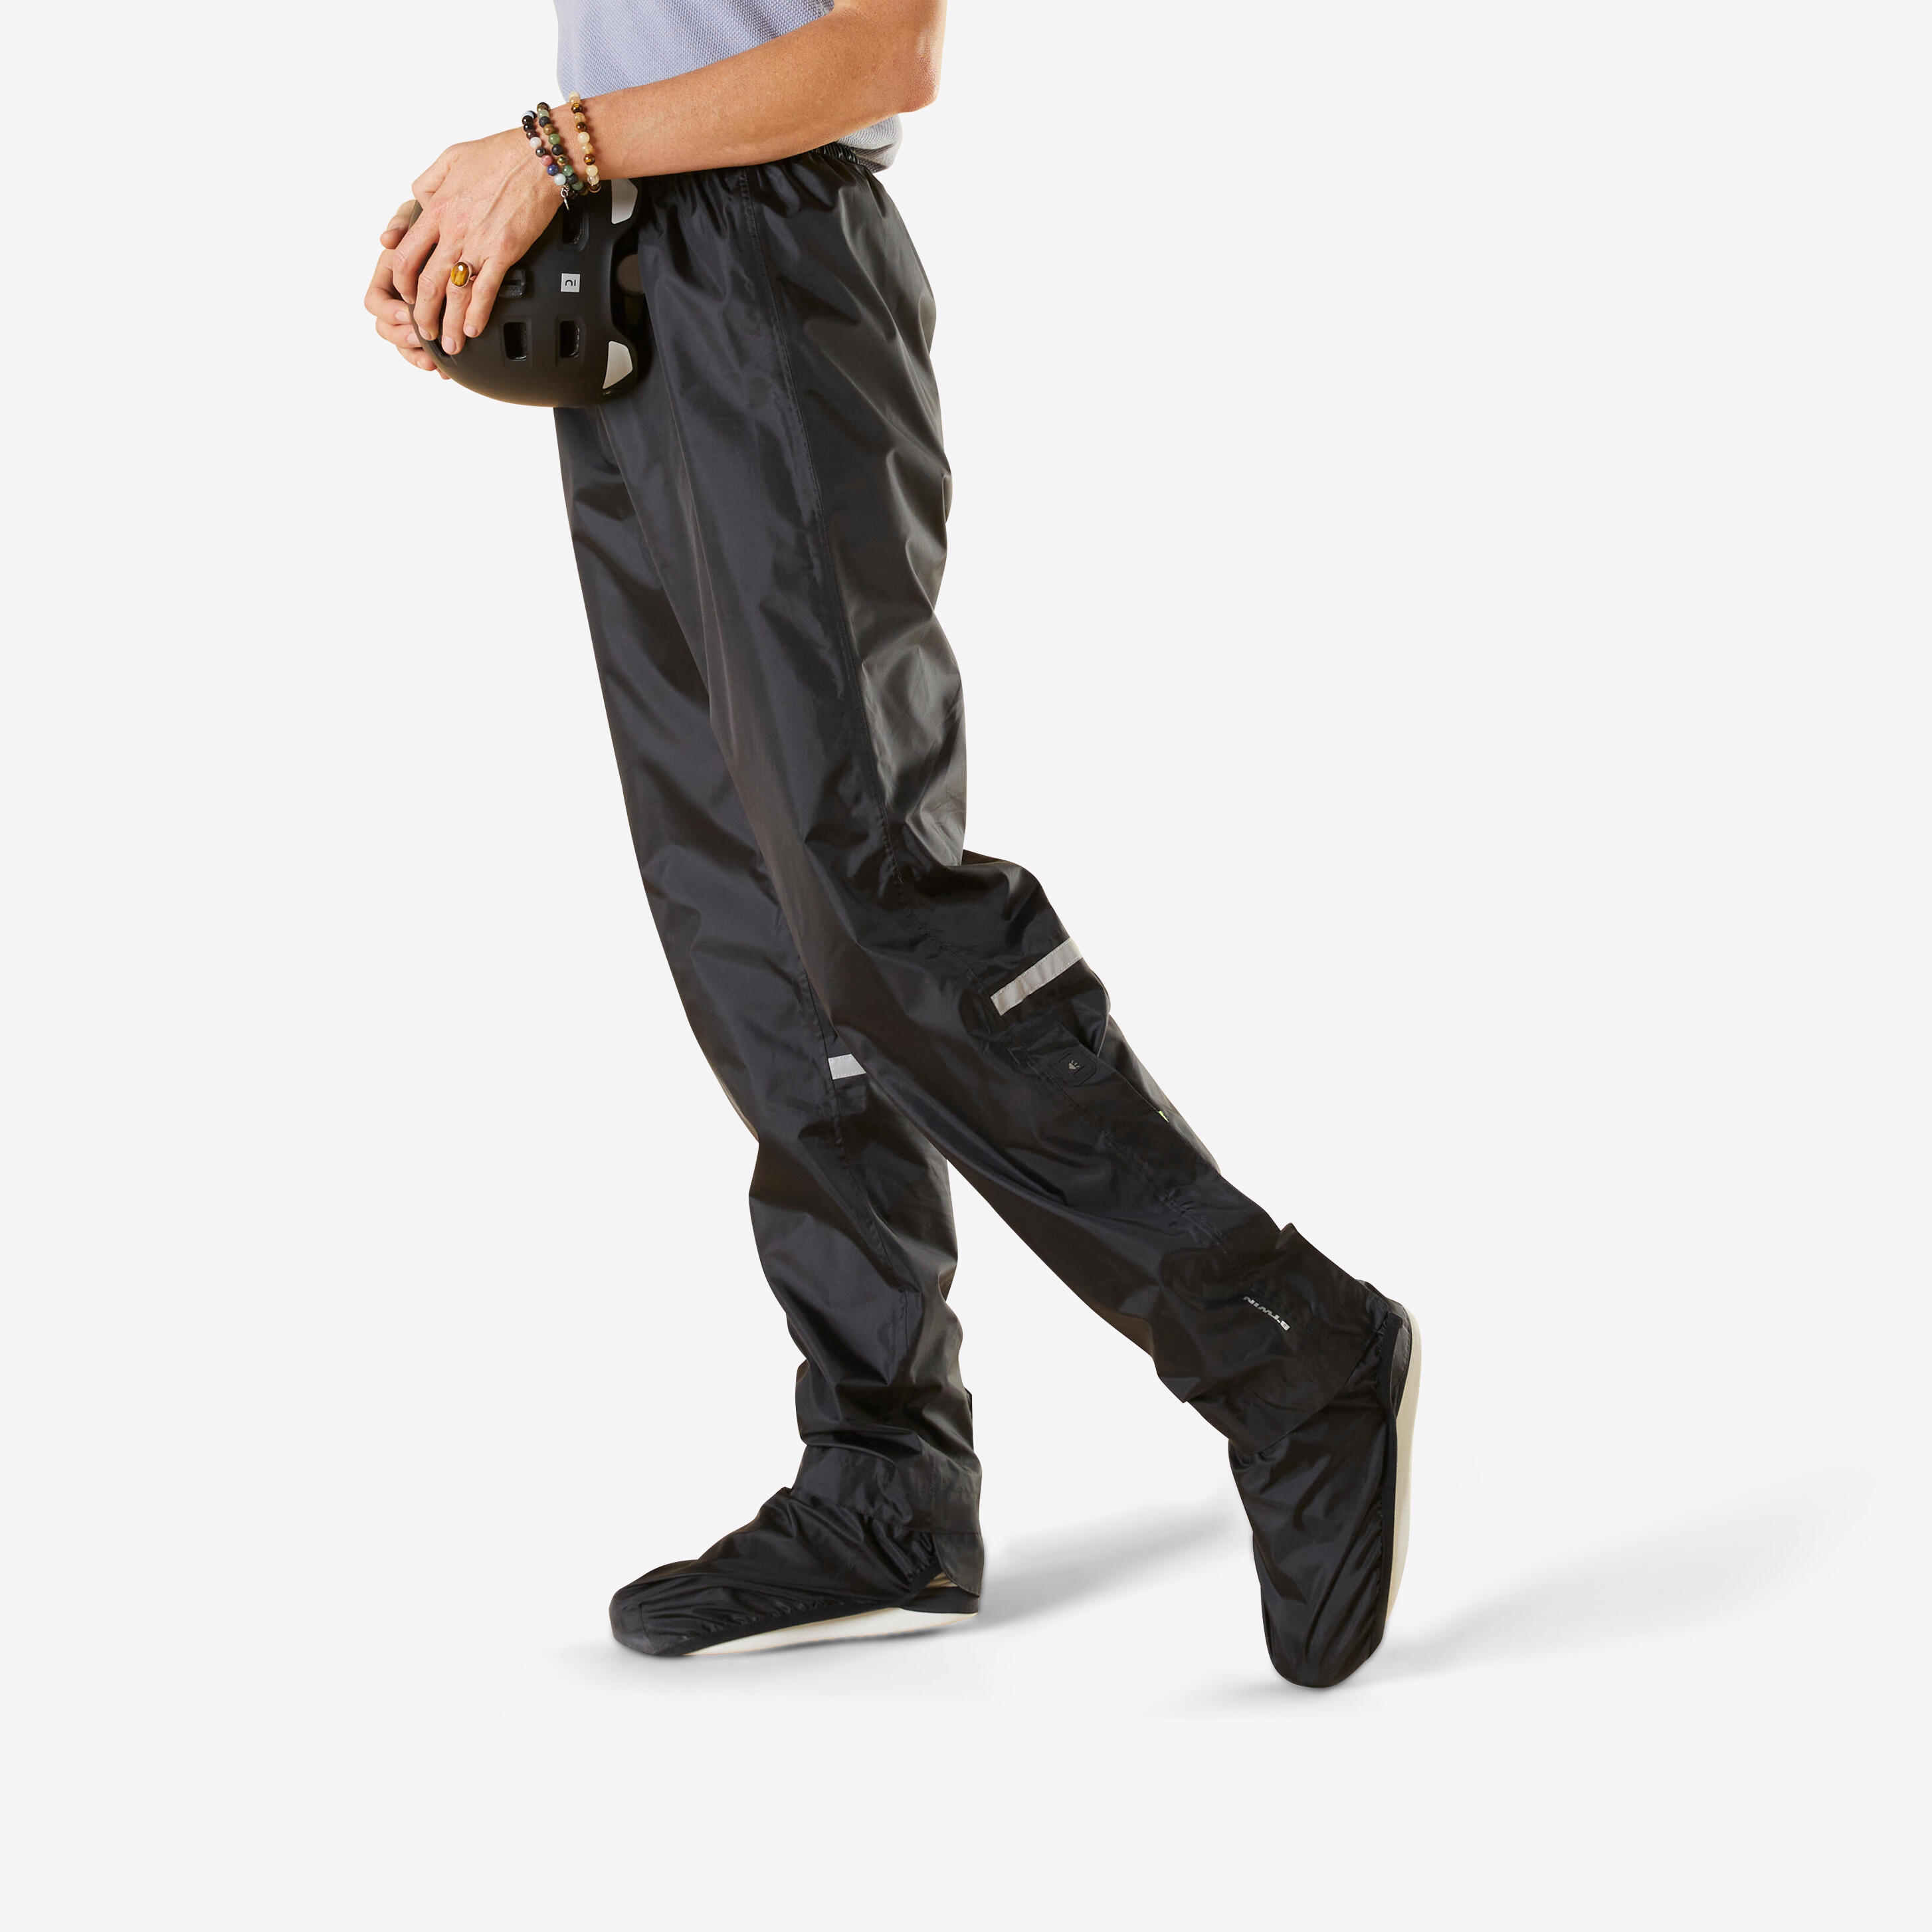 City Cycling Rain Overtrousers with Built-In Overshoes 100 - Black BTWIN